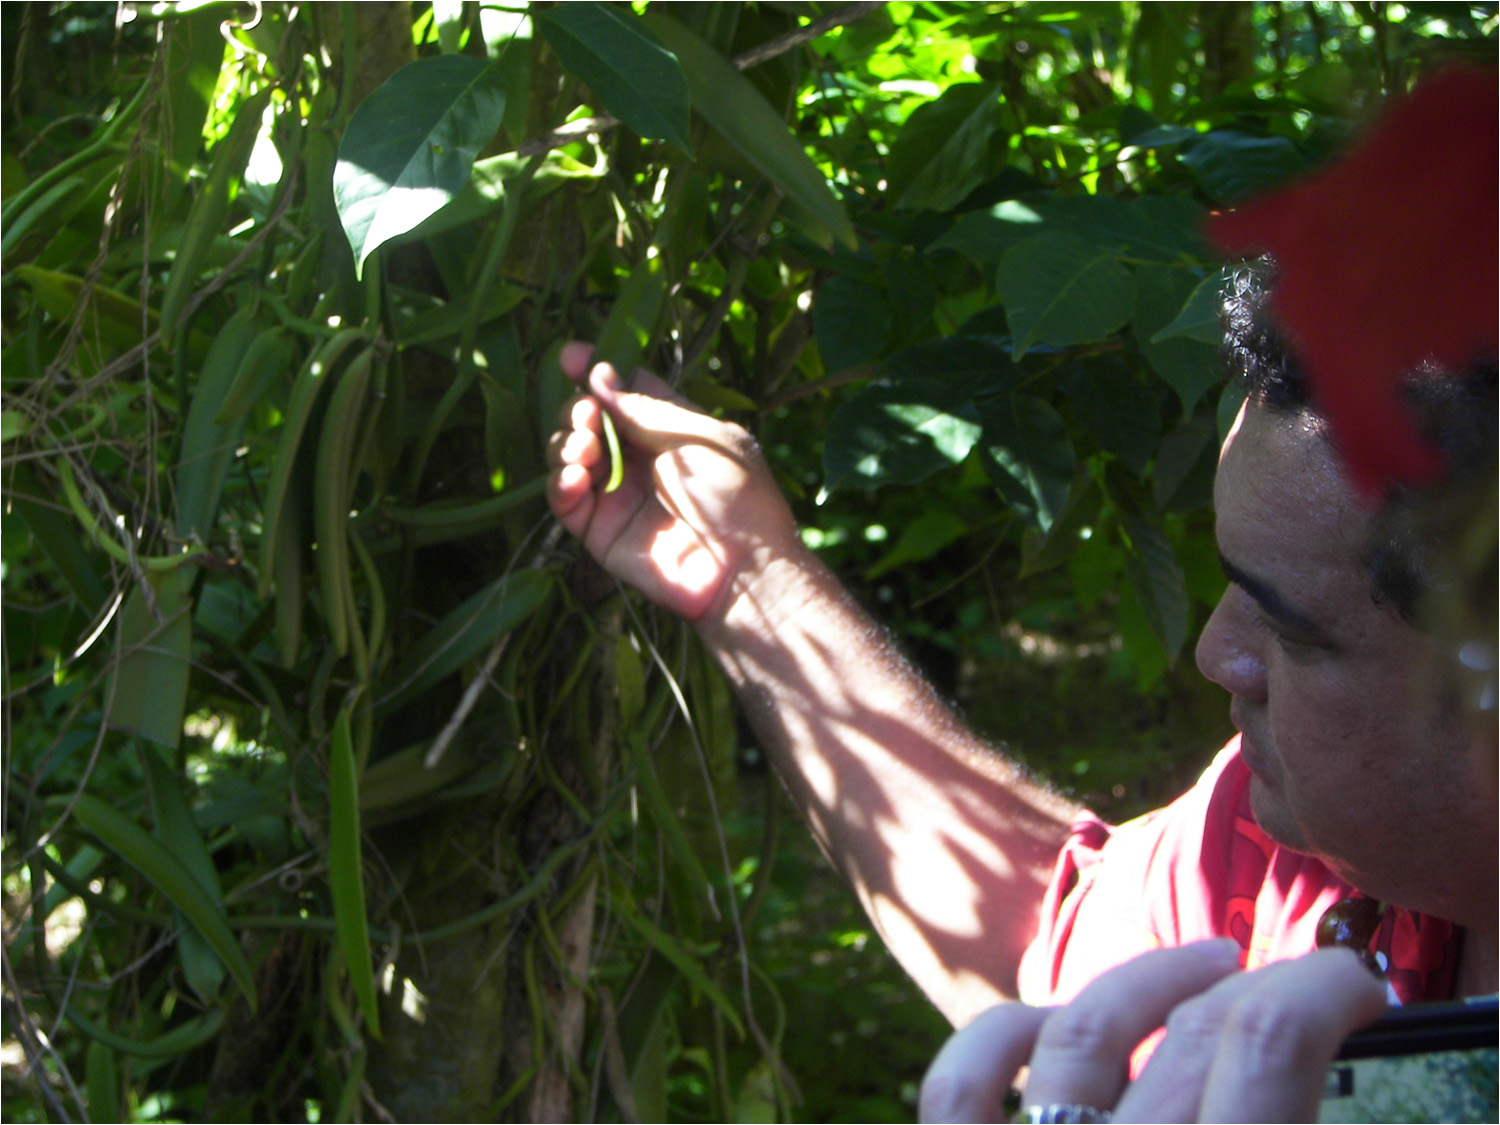 Our Tahaa tour guide explaining about the vanilla beans.